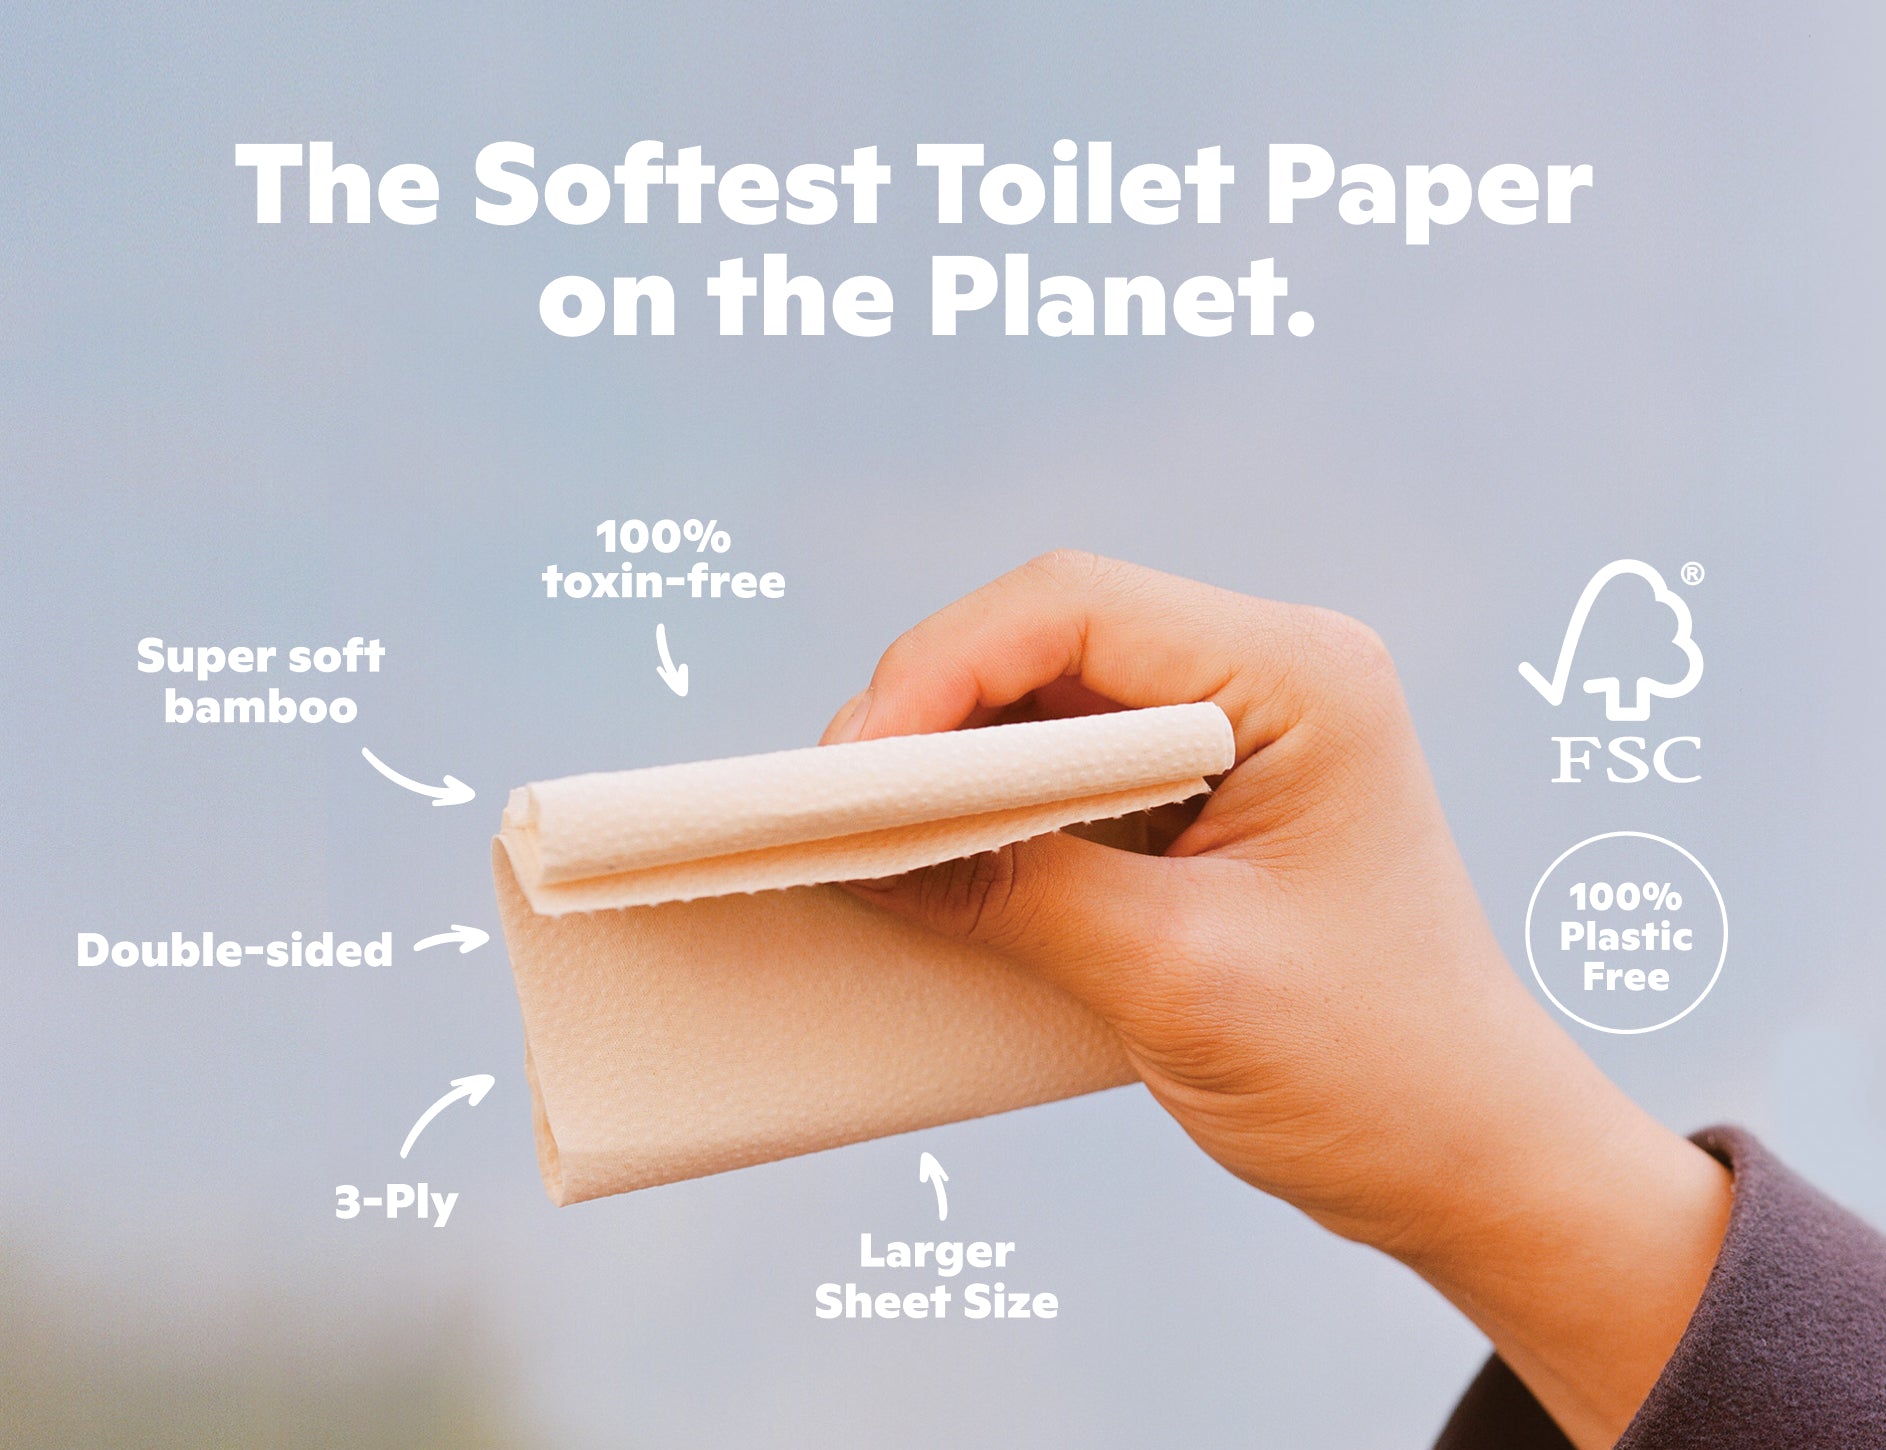 Toilet Paper - Plant Paper  be eco now, not eco later 🌎⏰